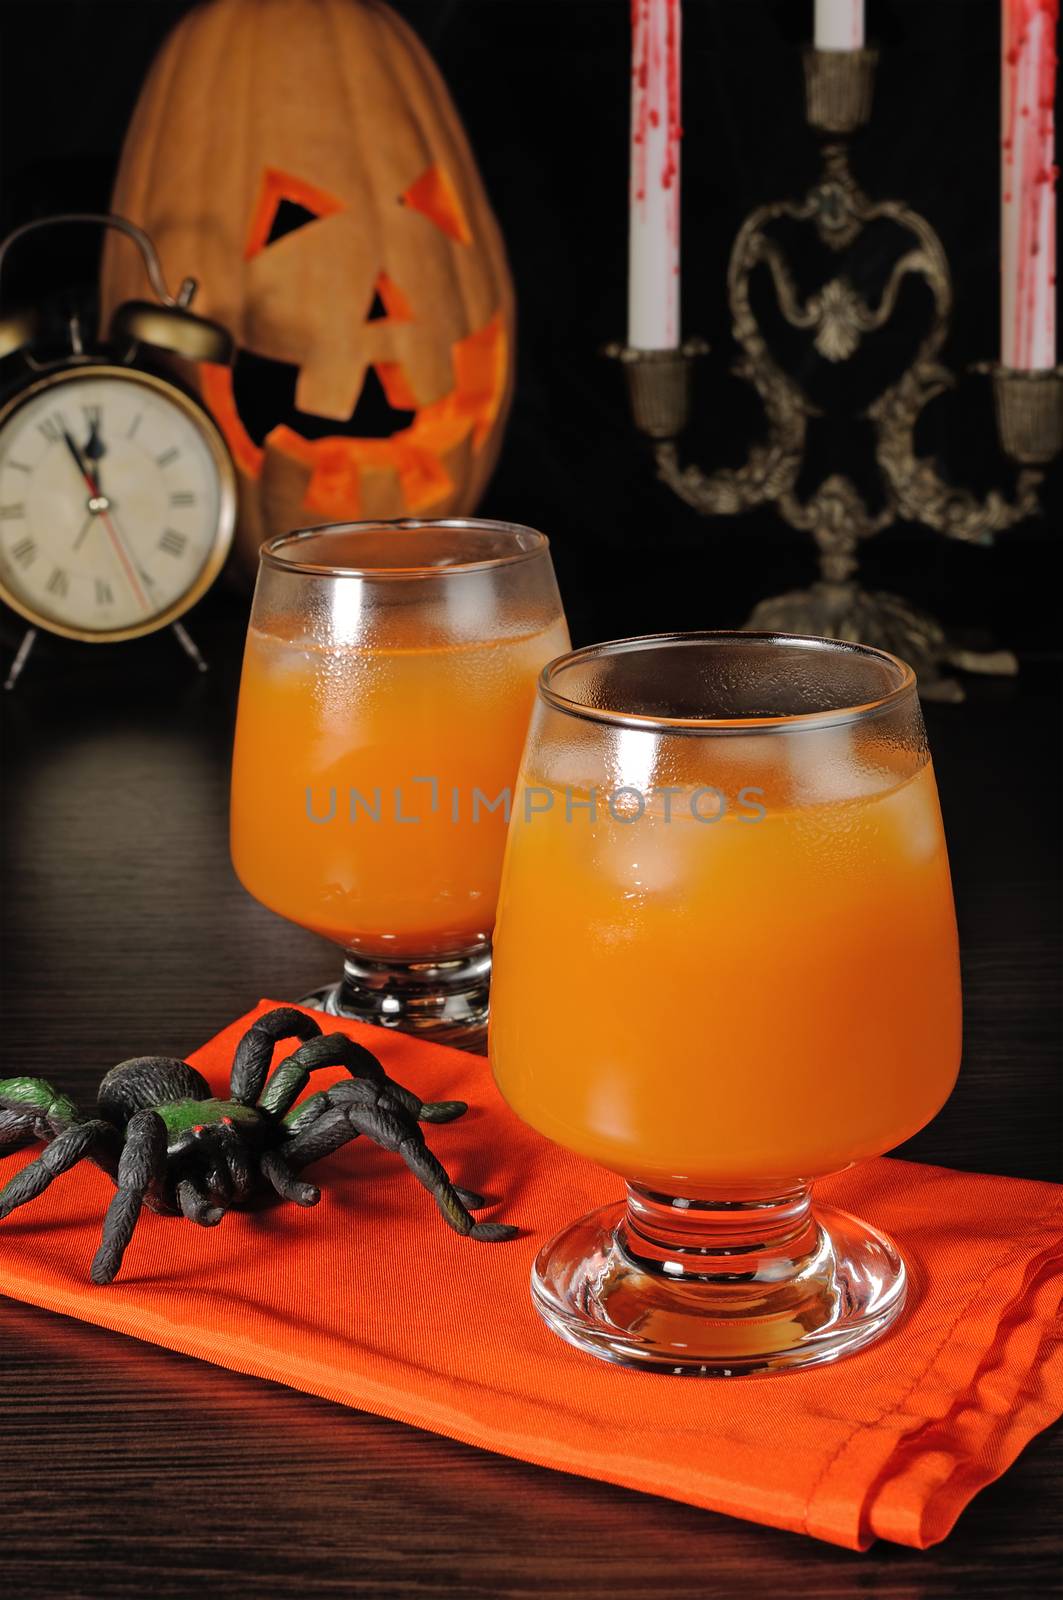 Pumpkin juice with ice by Apolonia